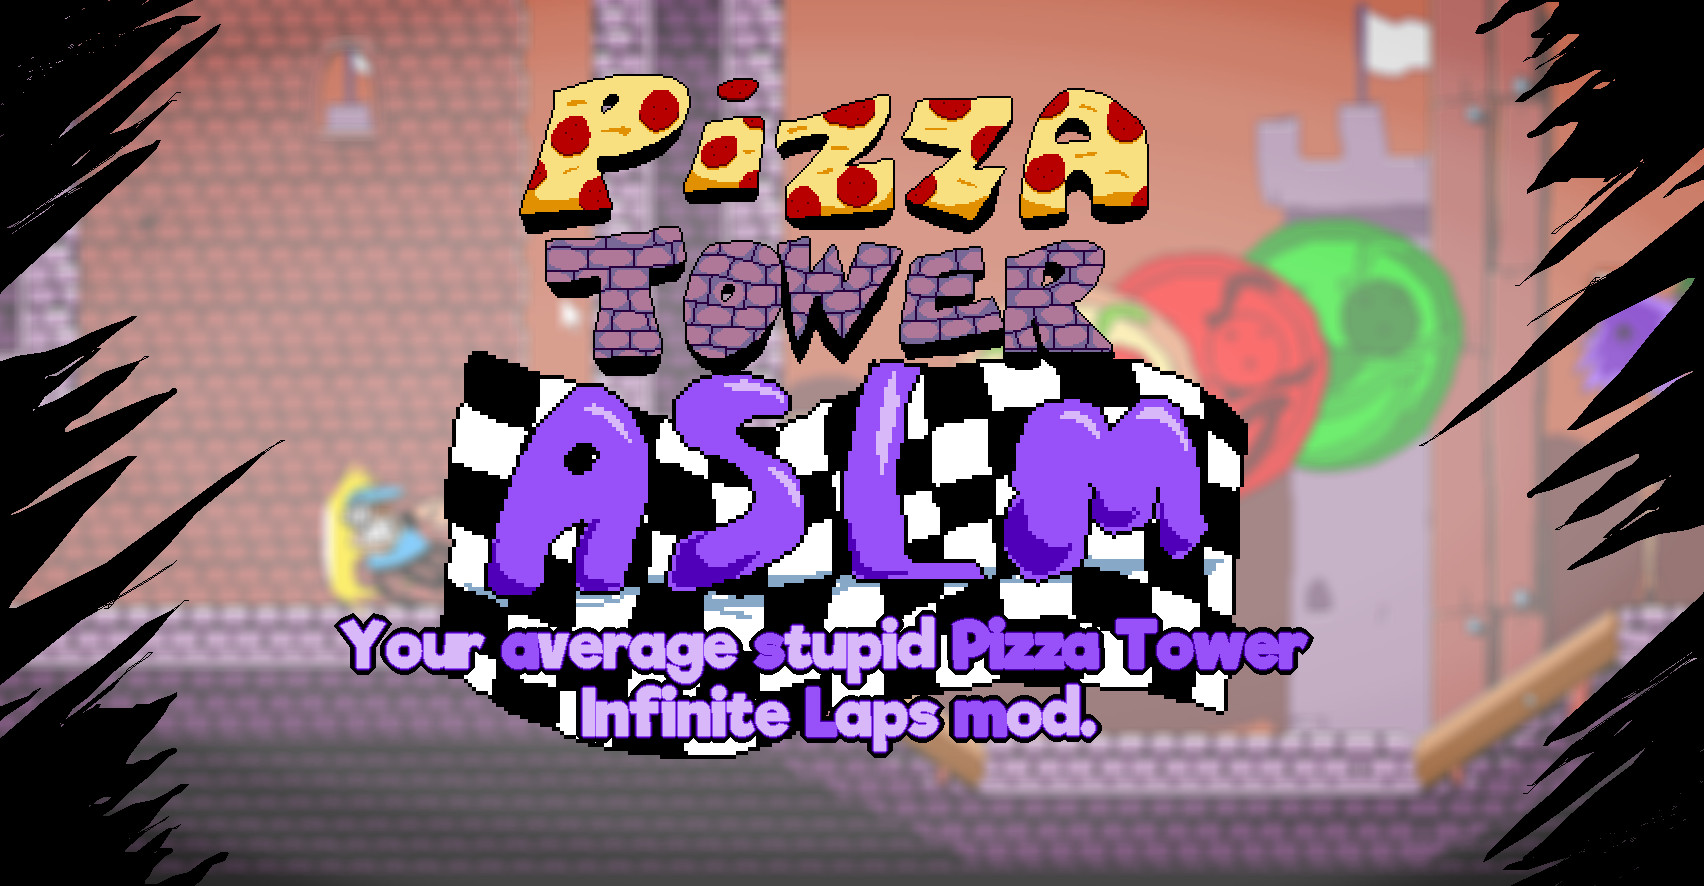 Pizza Tower is in my Top 5 video games of ALL TIME. Up there with